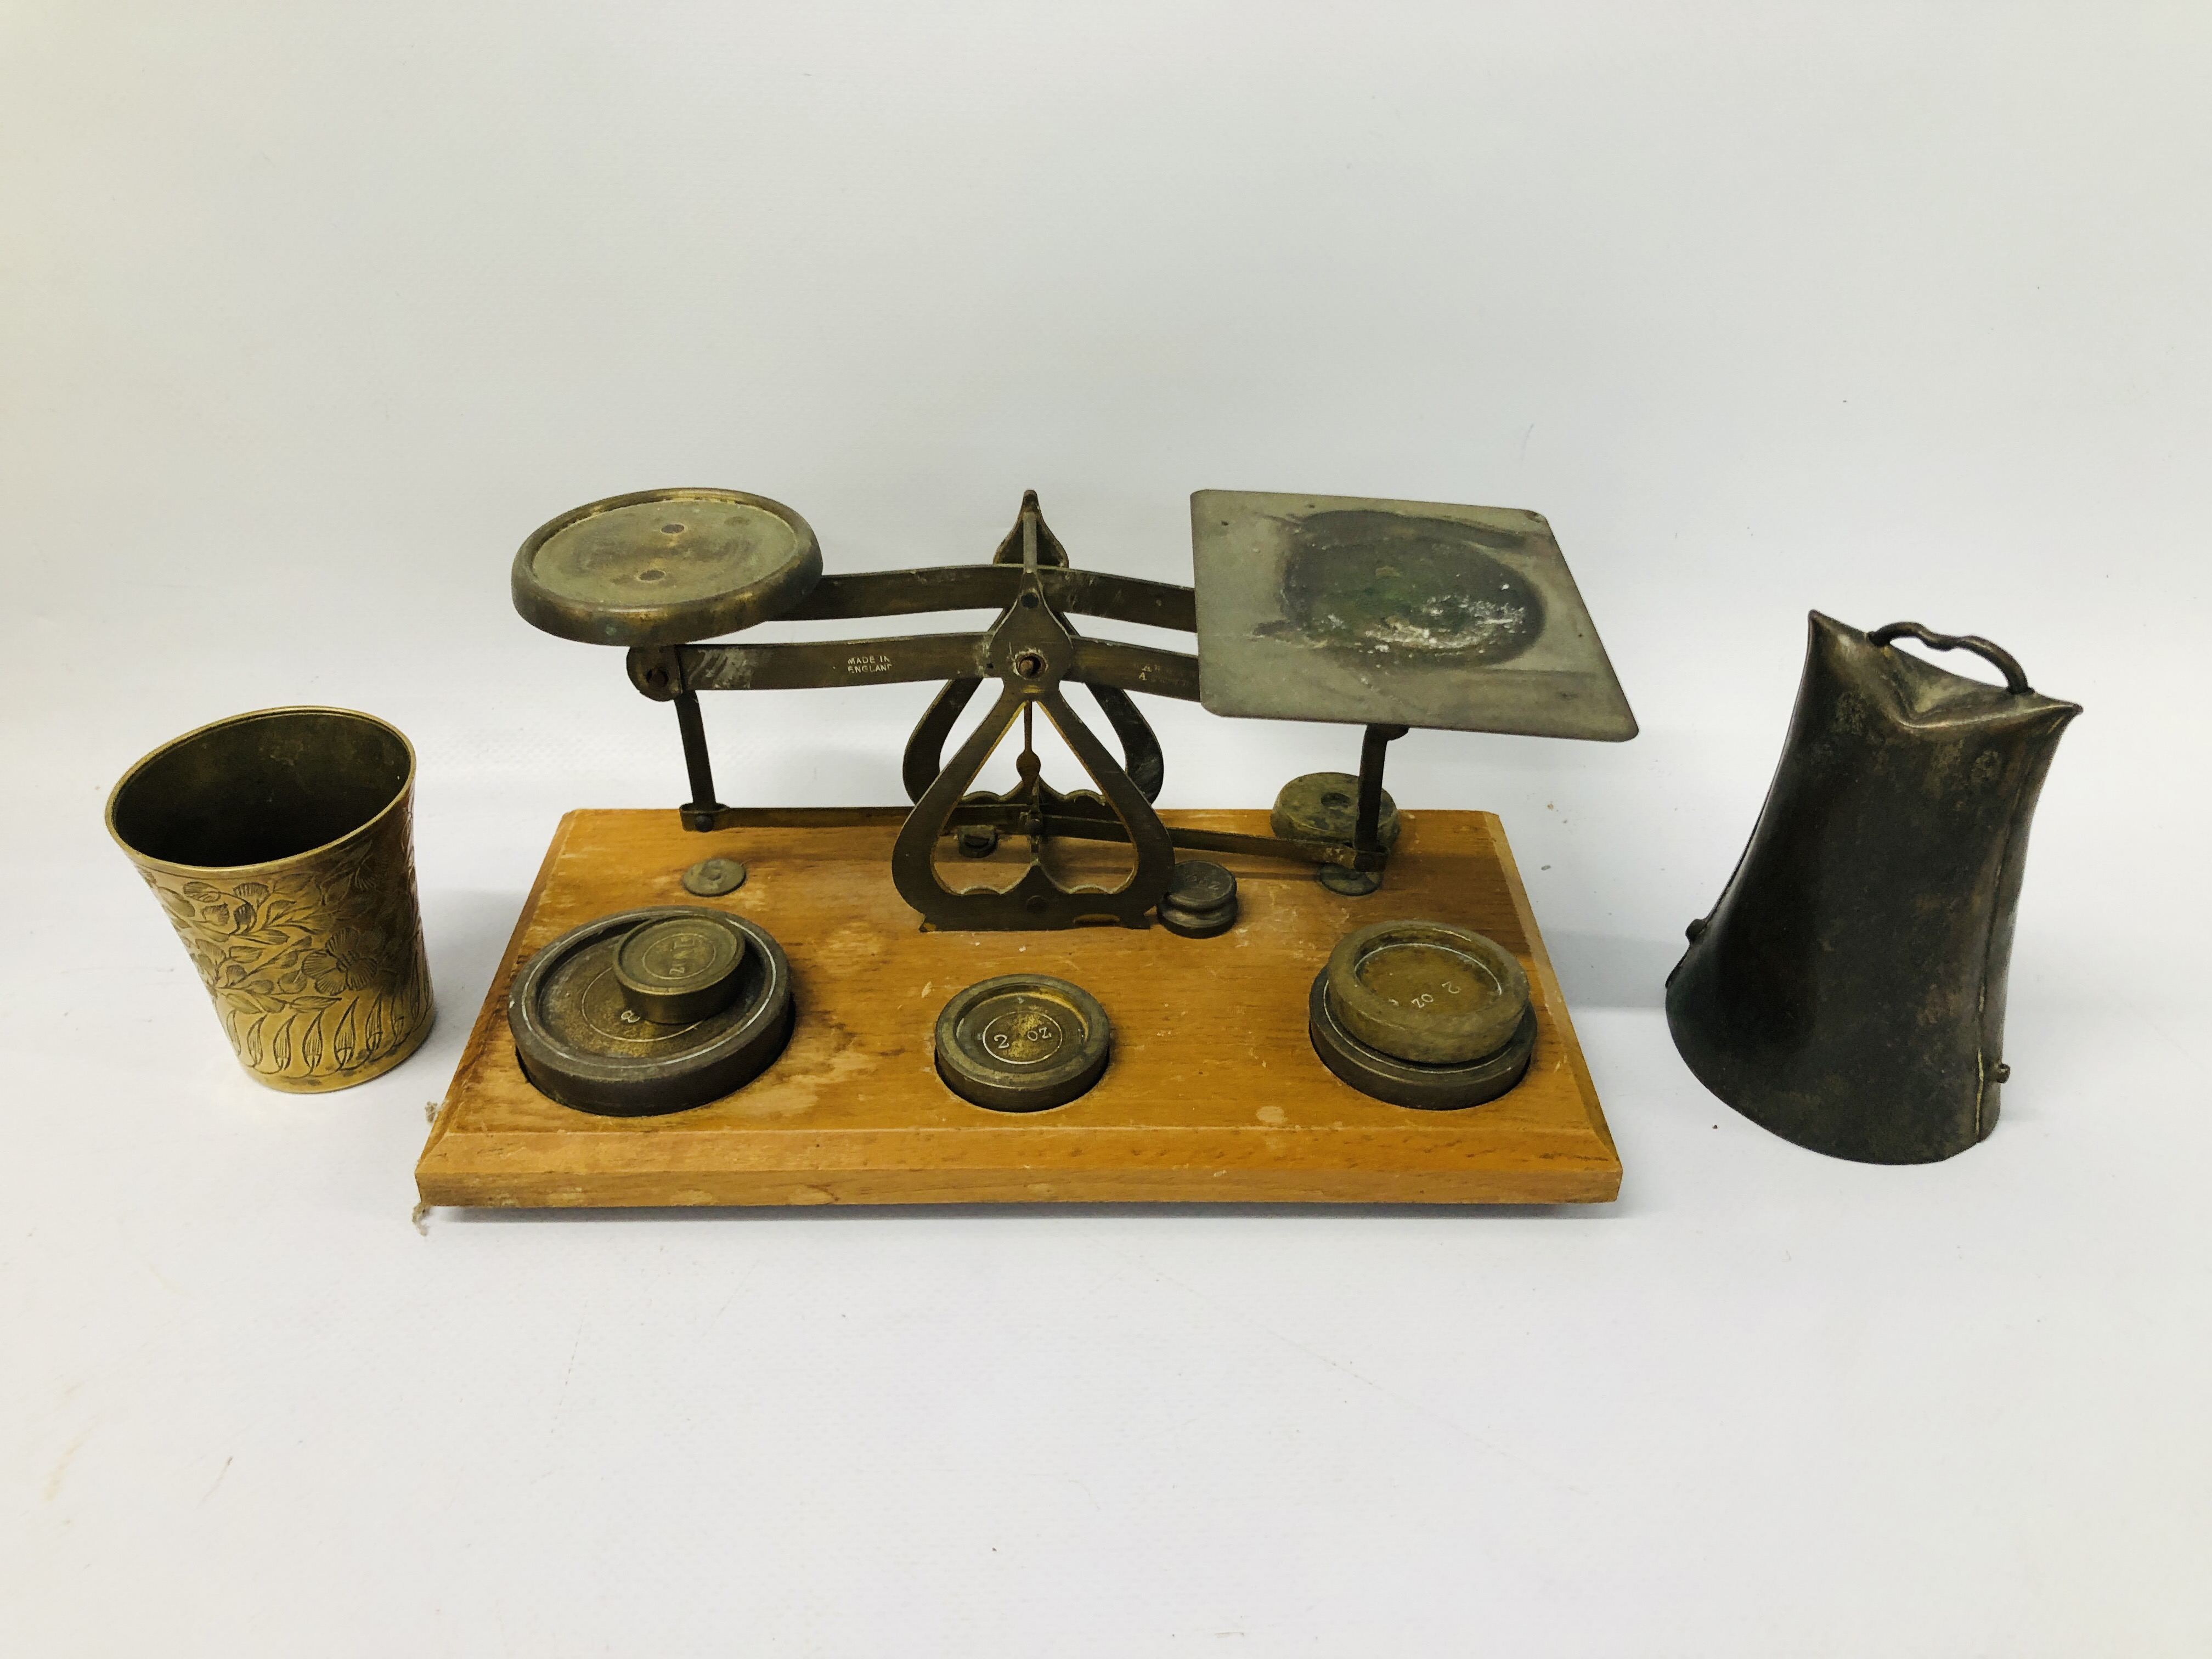 MIXED BRASS AND COPPER TO INCLUDE OIL LAMPS, LAMPS, STOVE, TRIVET, WATERING CAN, SCALES, CUPS, - Image 14 of 27